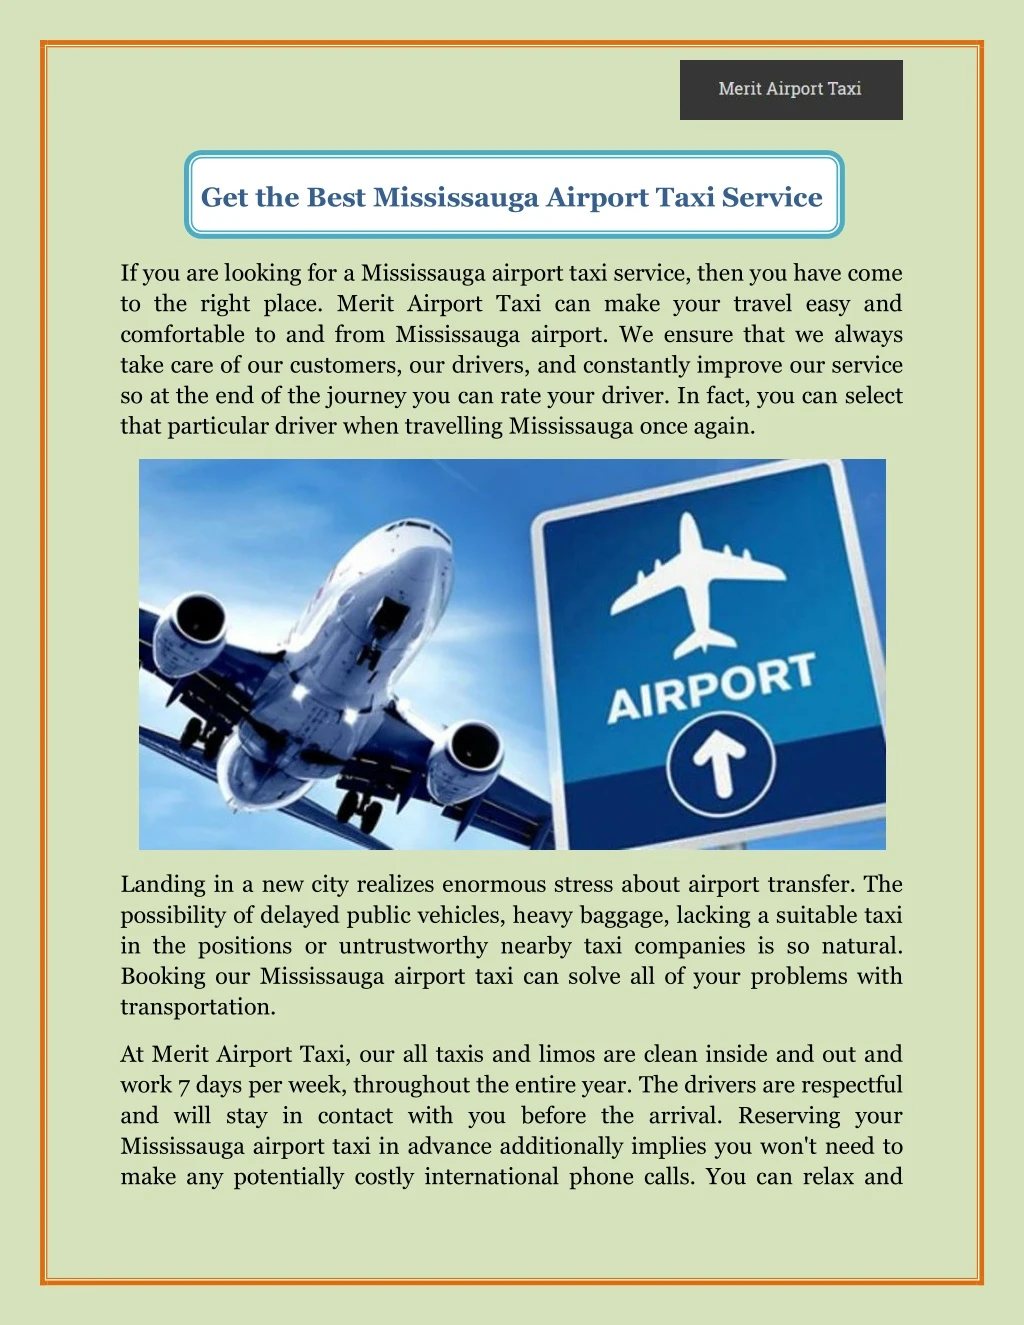 get the best mississauga airport taxi service